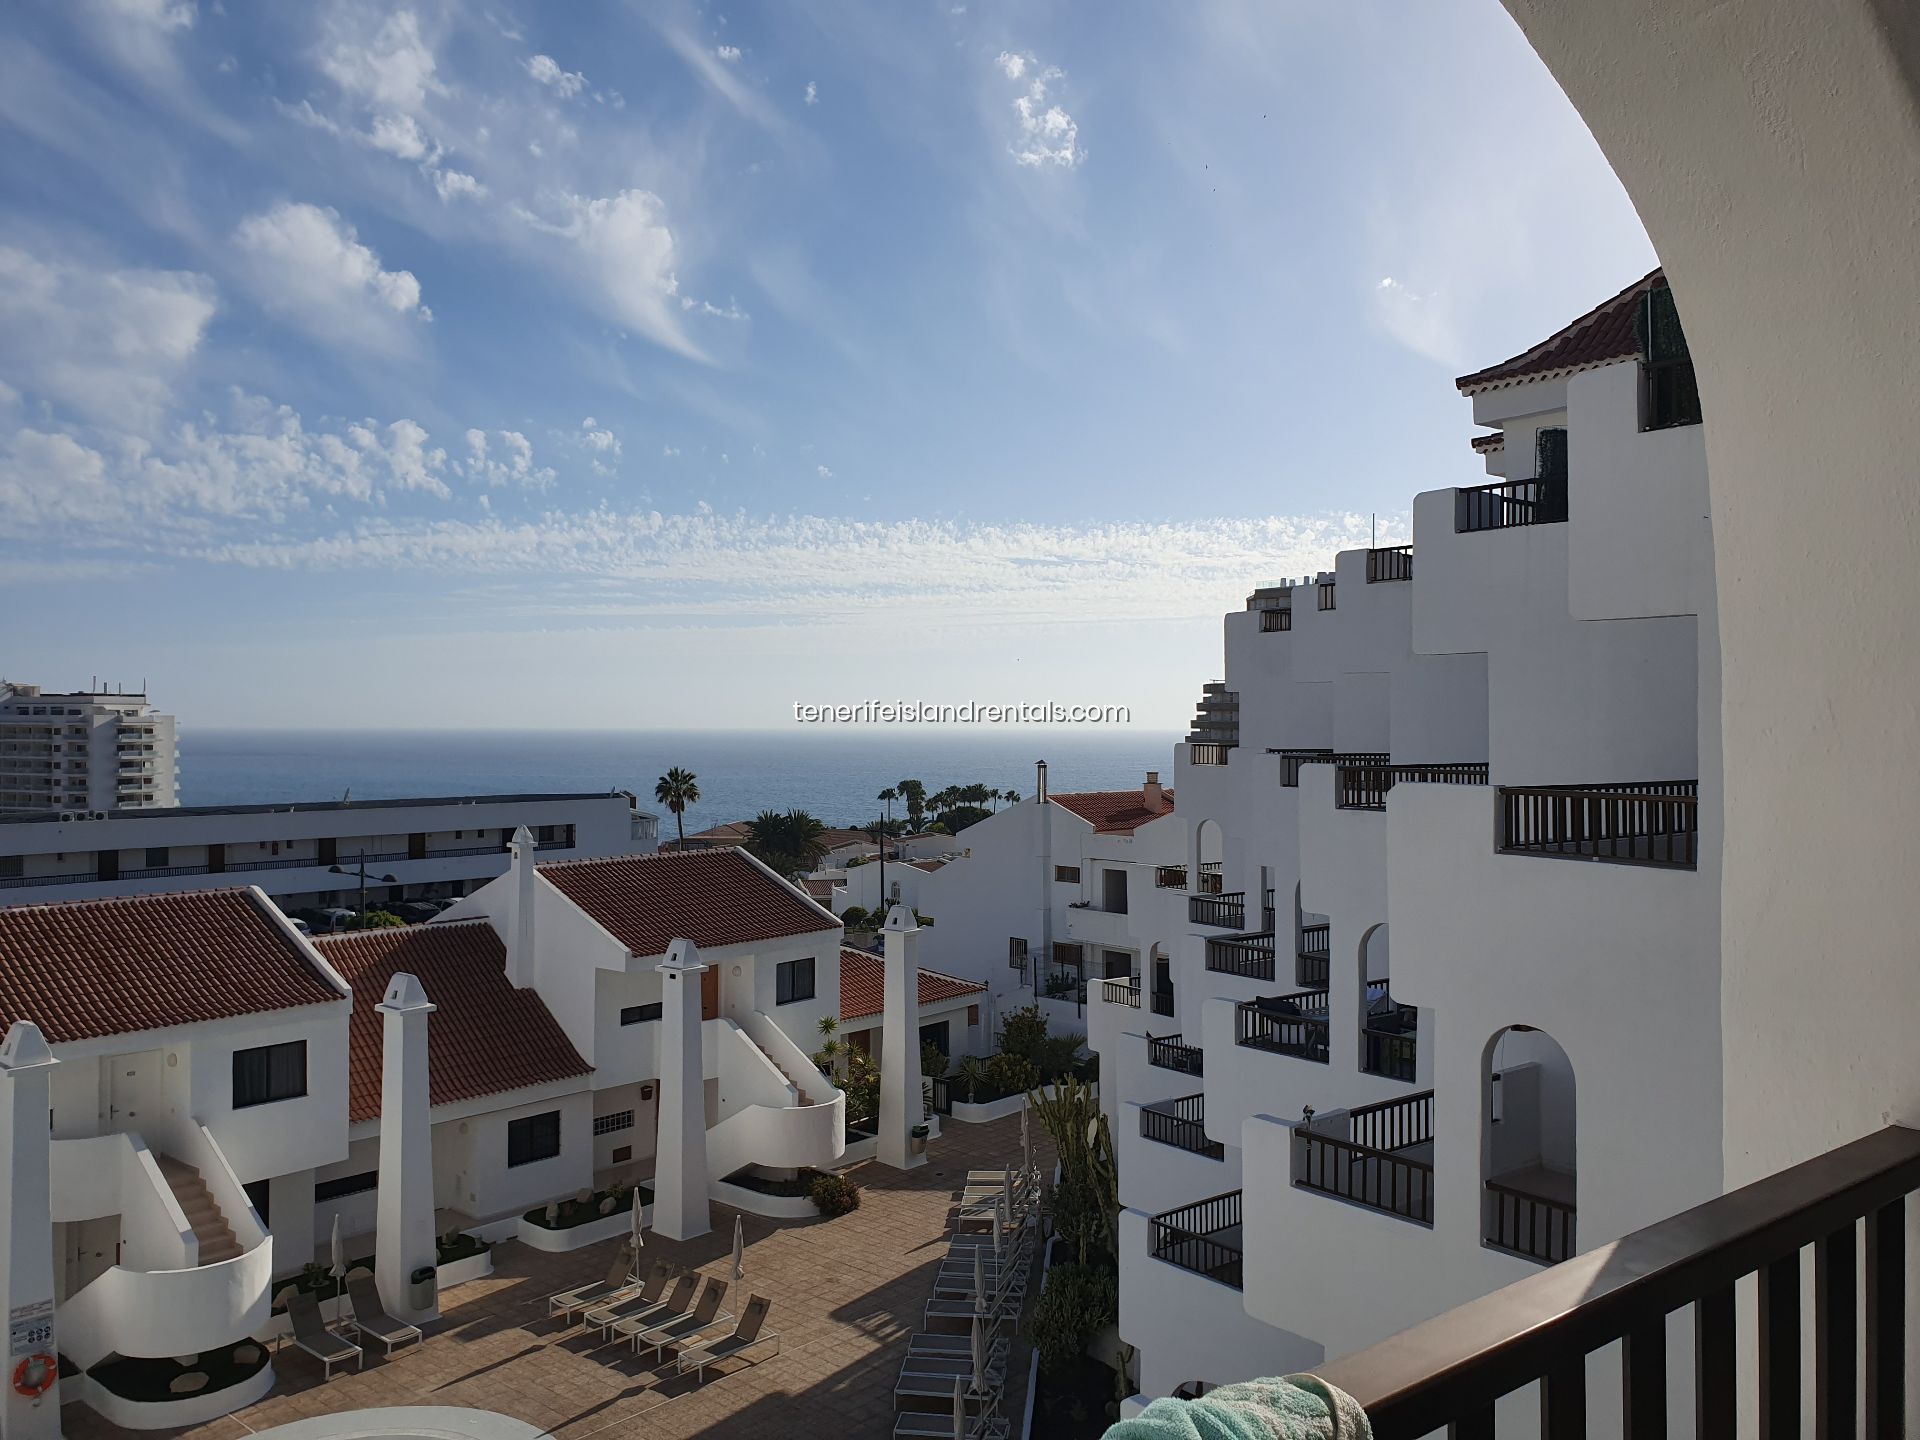 Apartment in Los Cristianos marketed by Tenerife Island Rentals